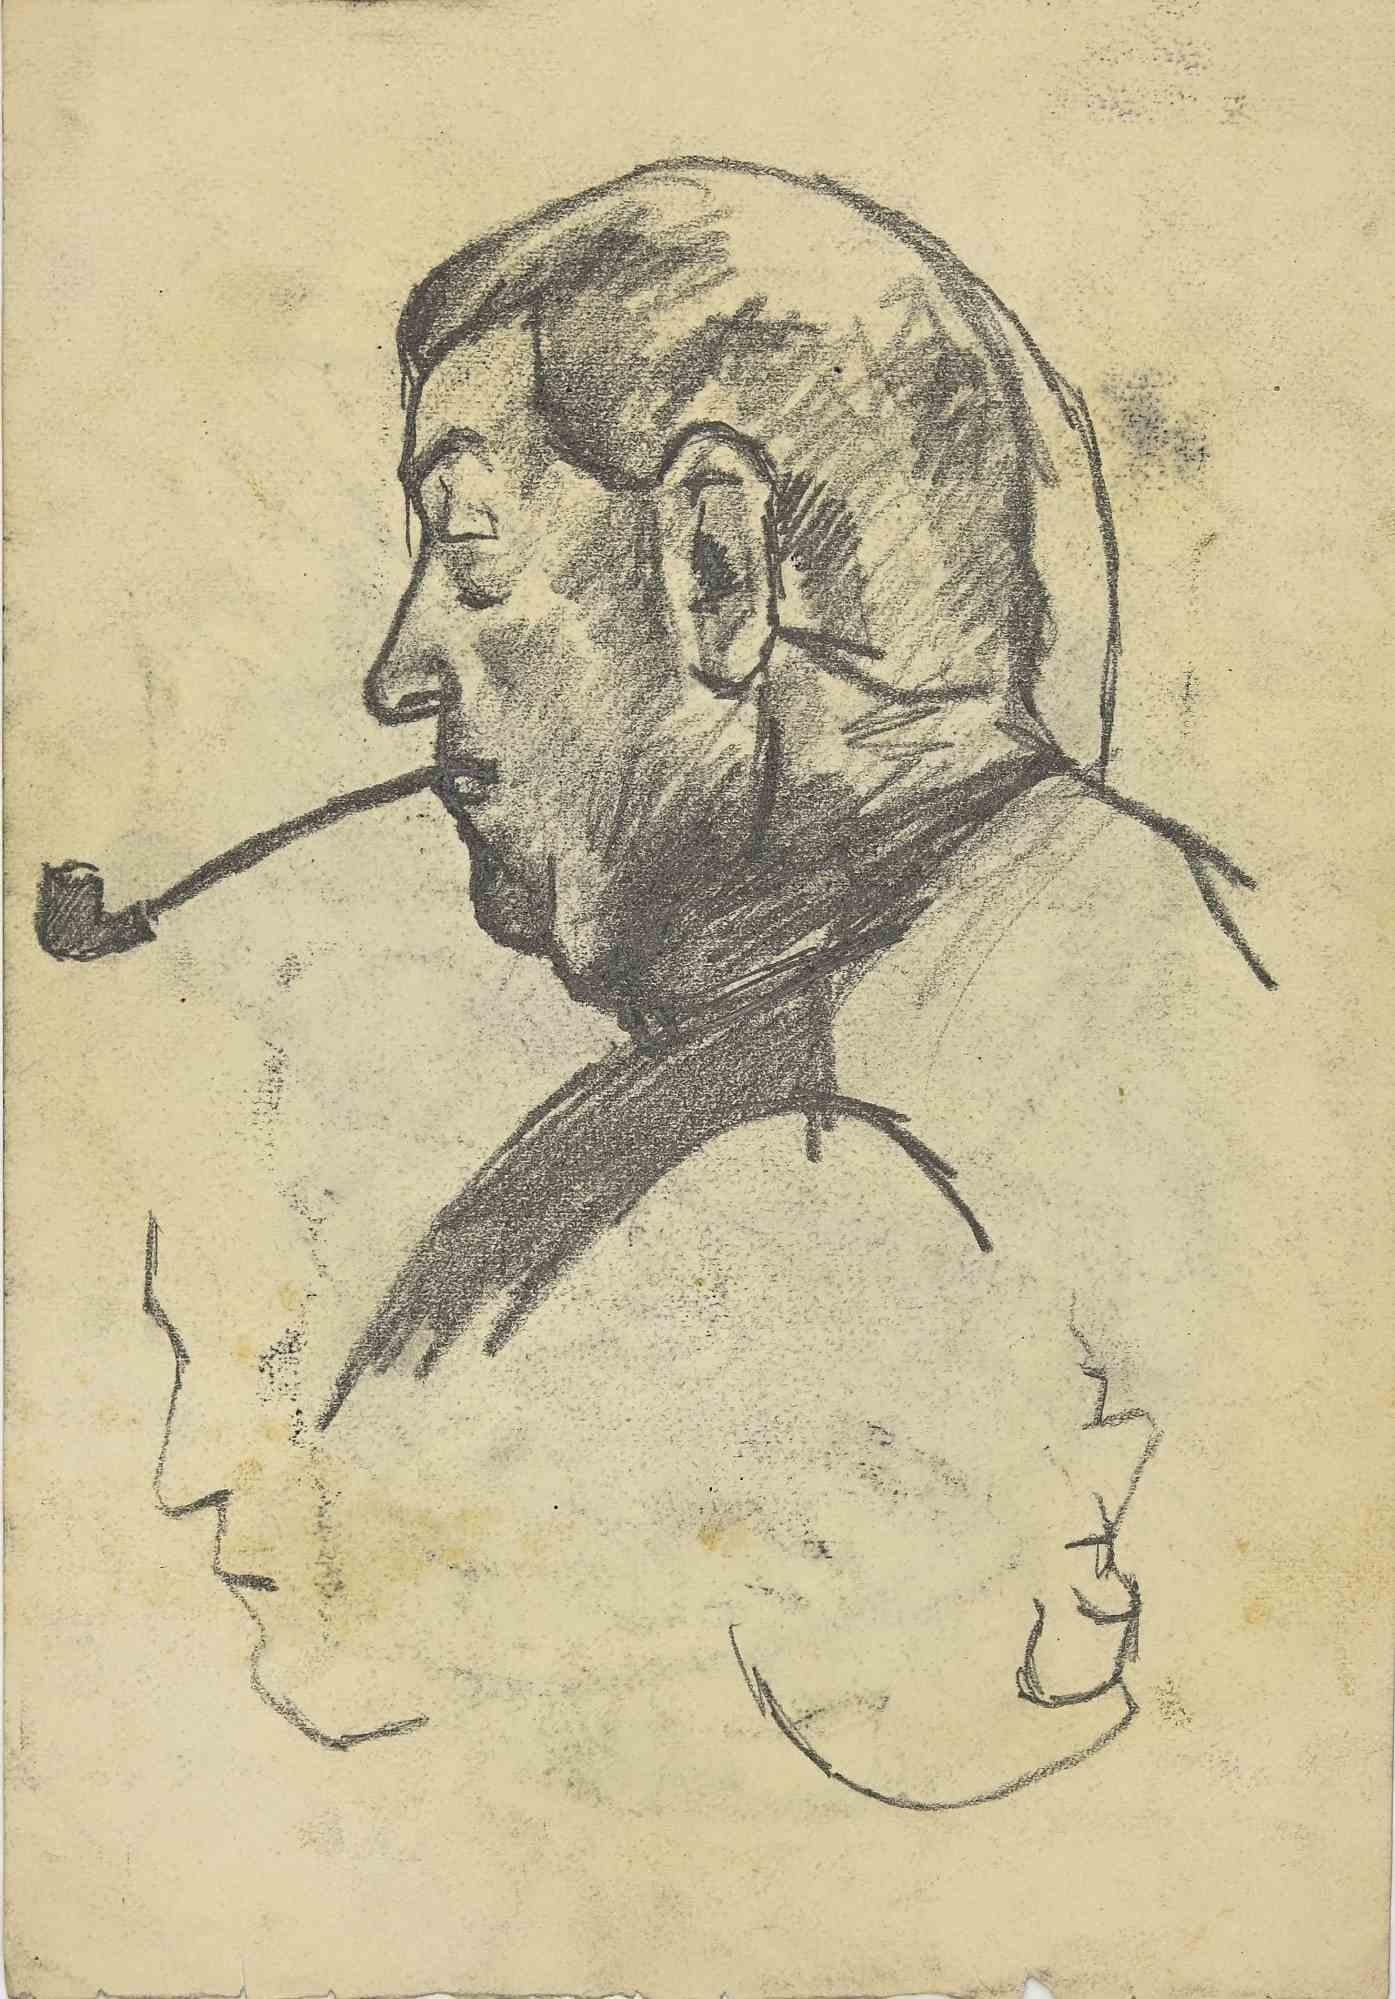 Portrait is an original Pencil Drawing realized by Mino Maccari in early 20th century.

Good condition on a colored cream paper, with other sketch on rear.

Hand signed by the artist.

Mino Maccari (1898-1989) was an Italian writer, painter,